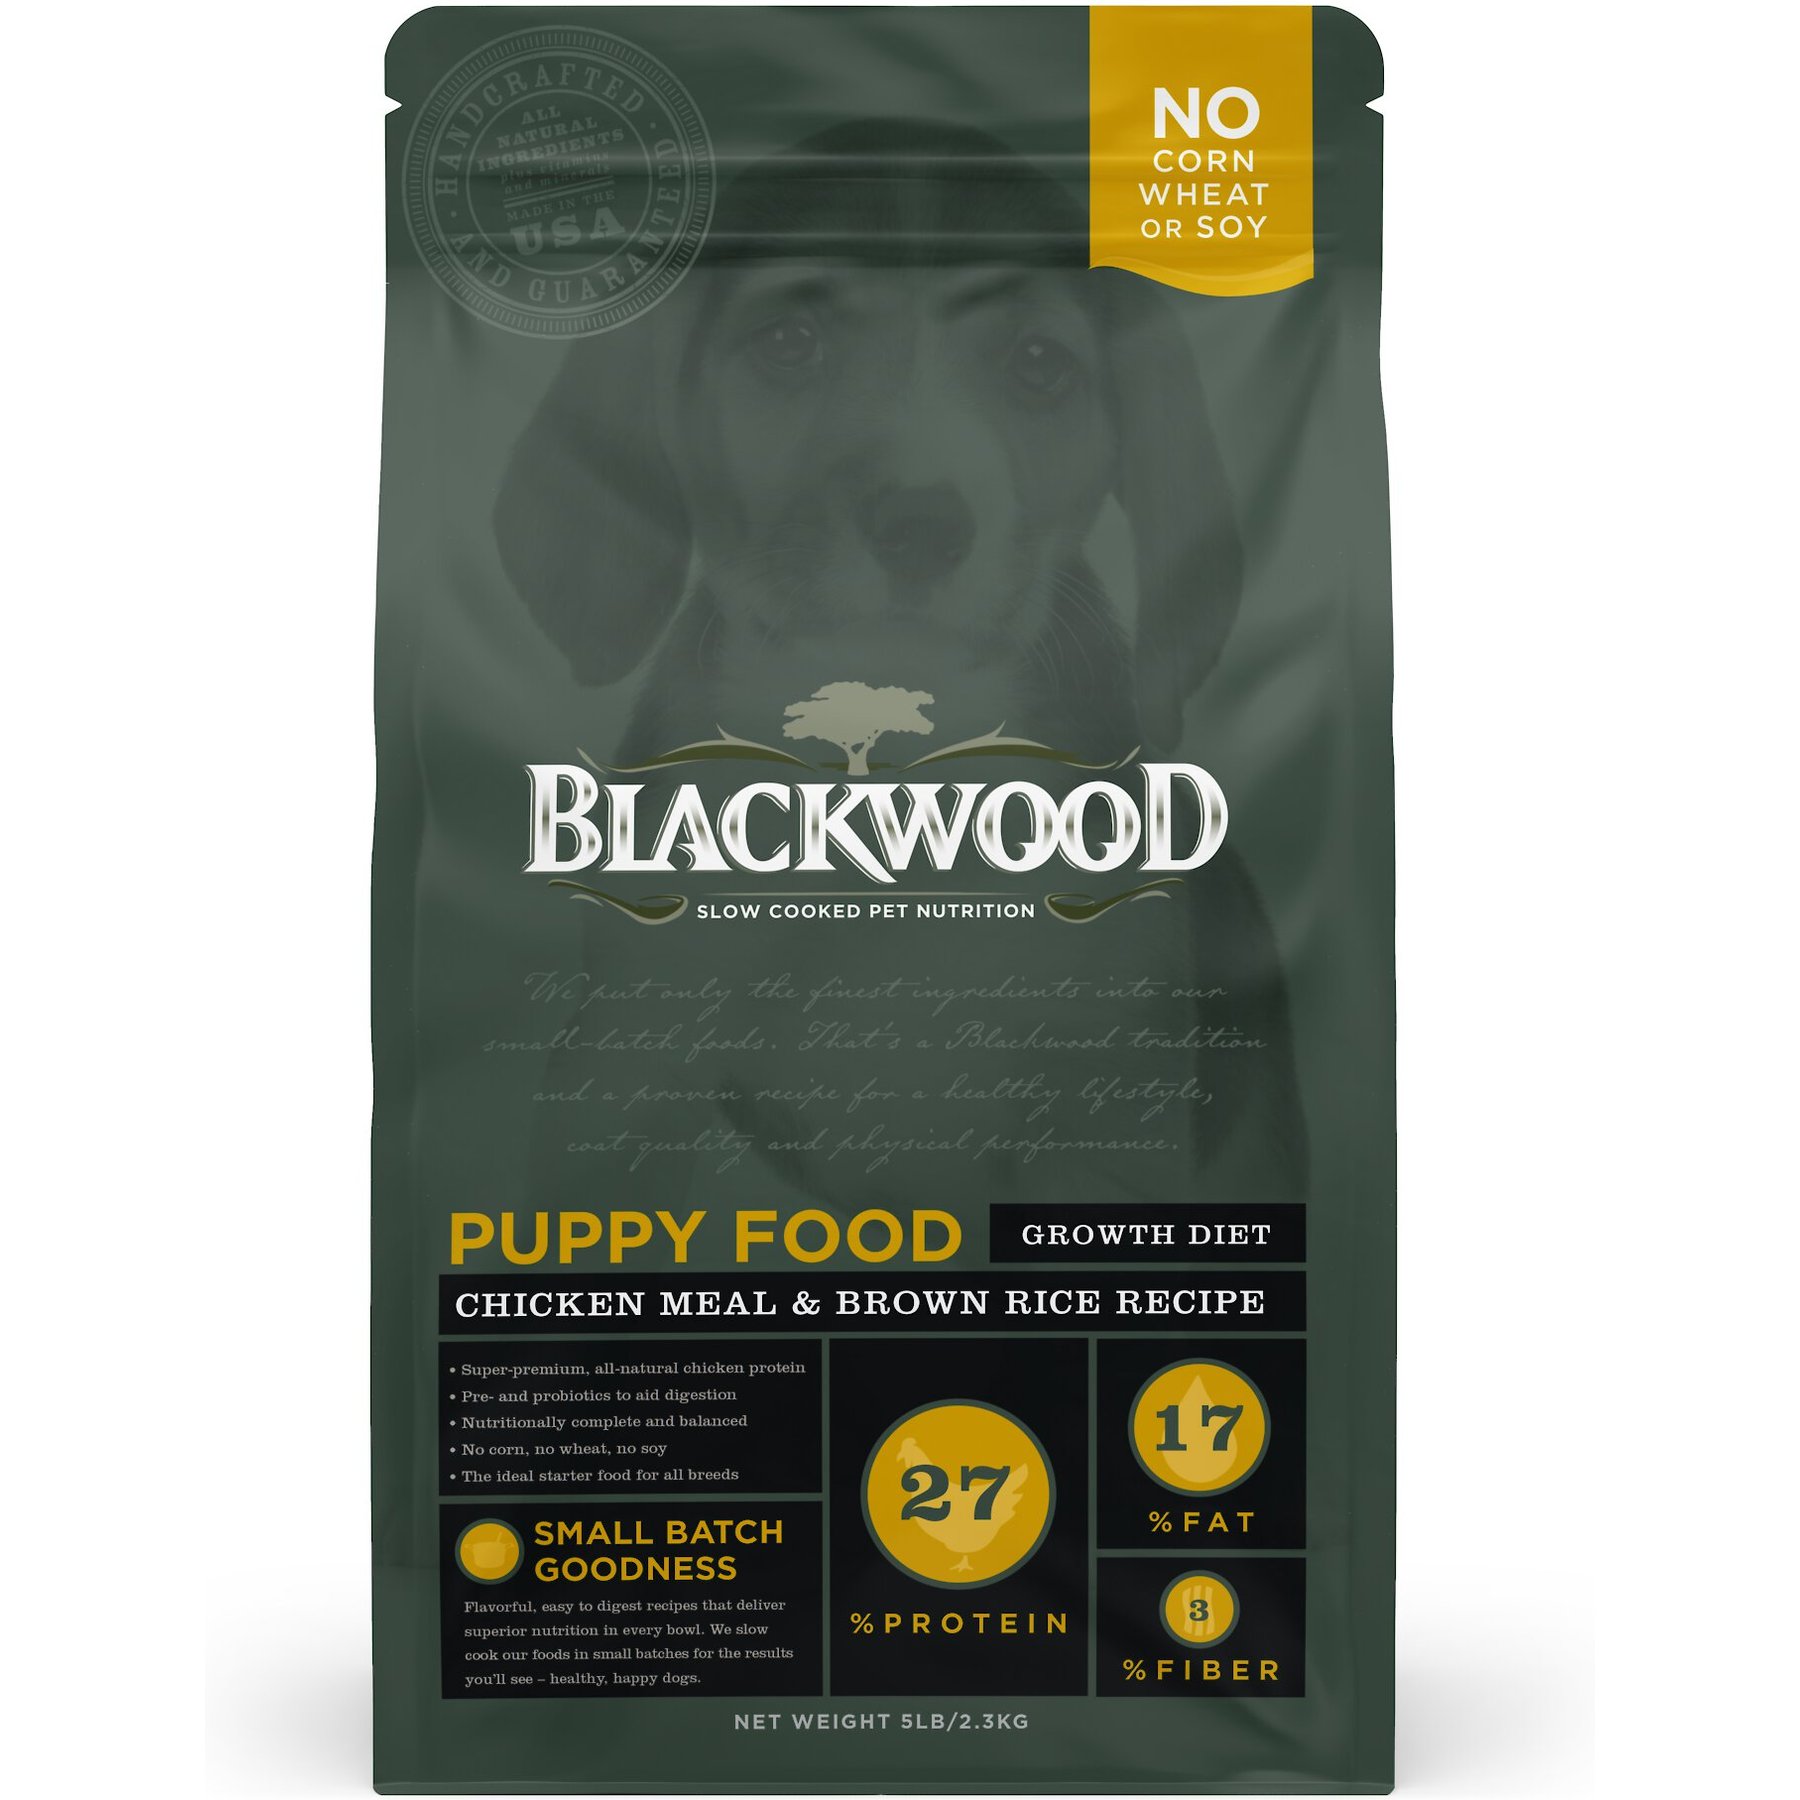 Blackwood Dog Food Everyday Diet Made in USA [Natural Dry Dog Food for All  Breeds and Sizes] (15 pounds)